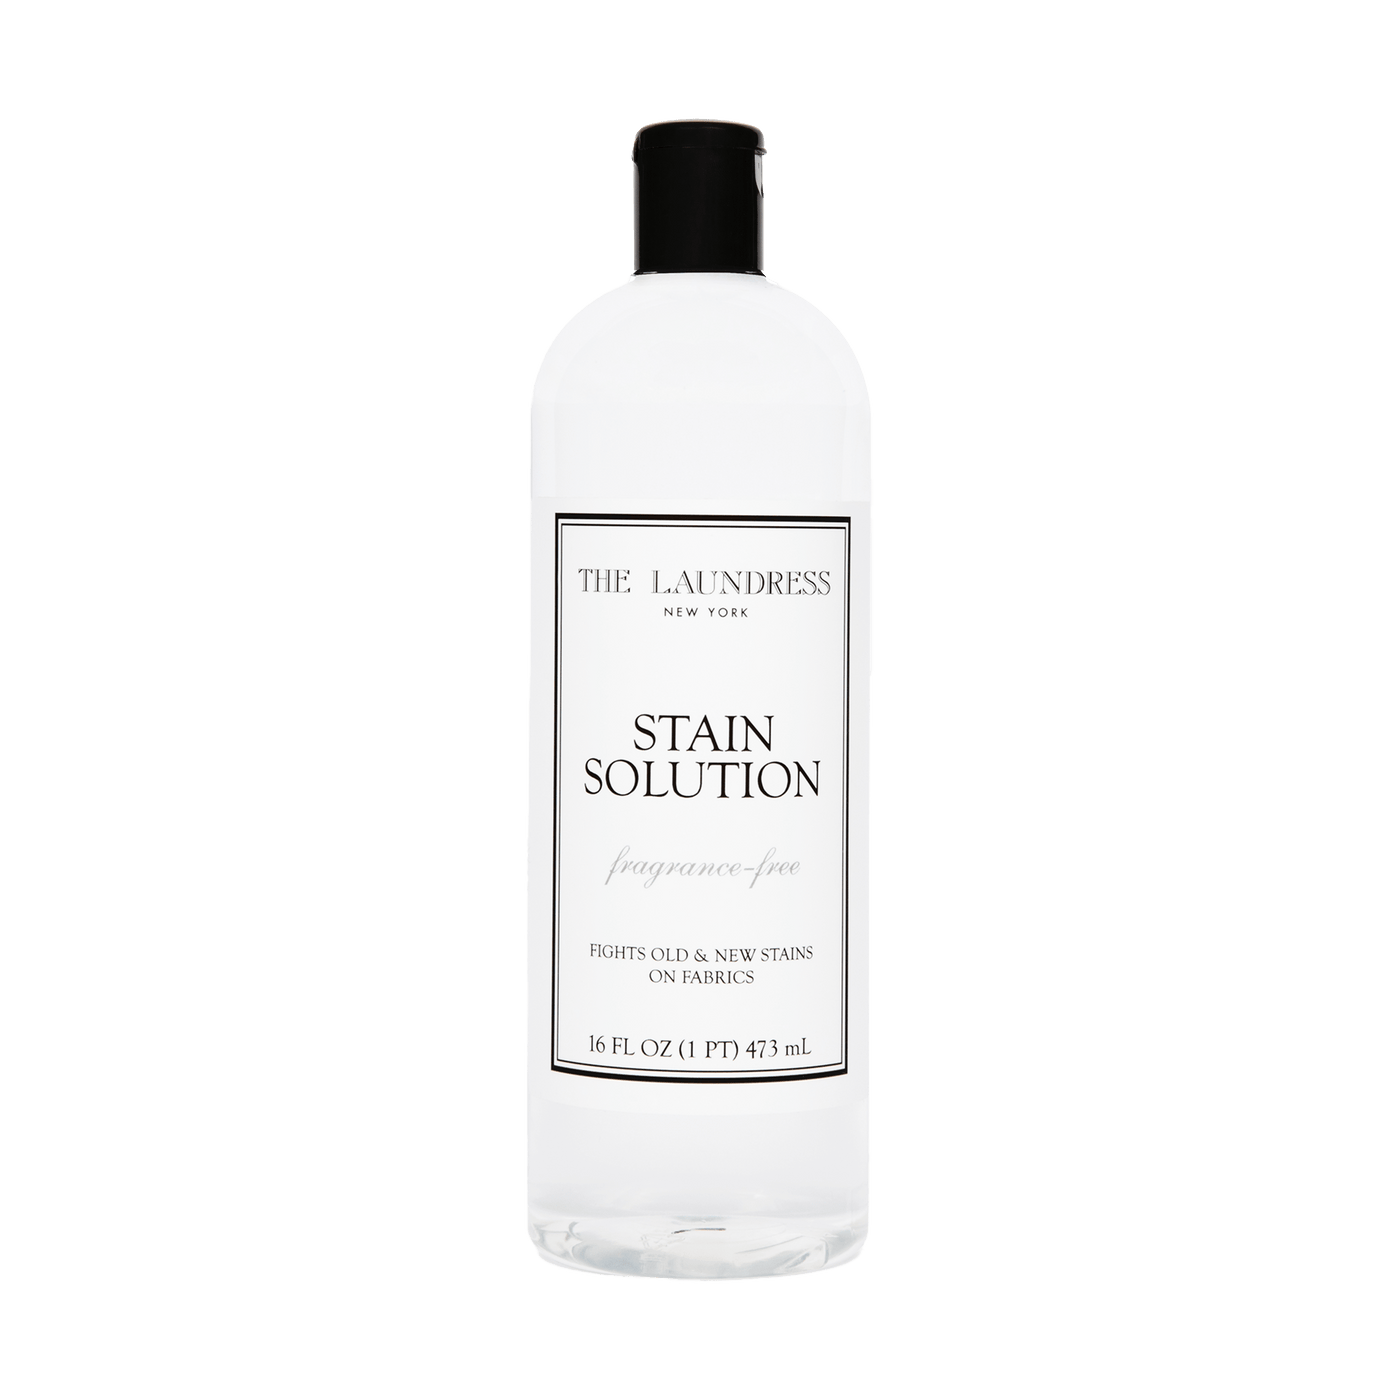 The Laundress Stain Solution, a fragrance-free formula used to fight old & new stains on fabrics.